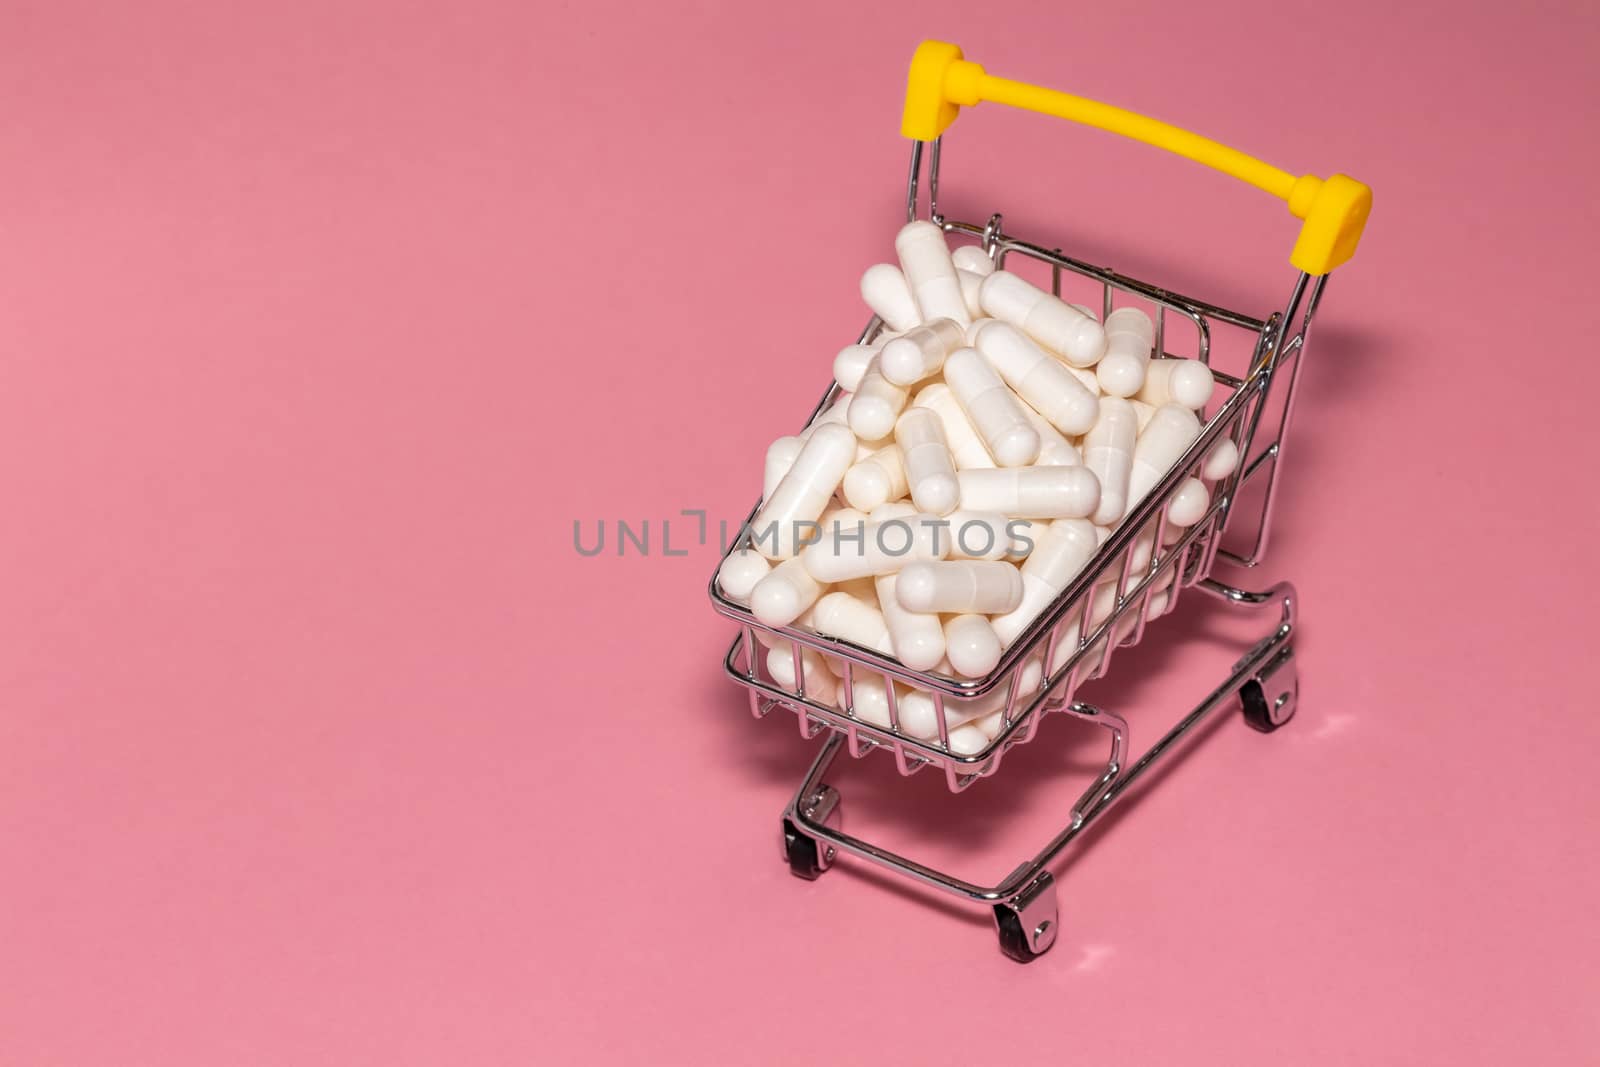 High angle shot of a small shopping cart full of white pills. Pink background, copy space. Shopping online, buying medicine, pharmaceutical business concepts. by DamantisZ